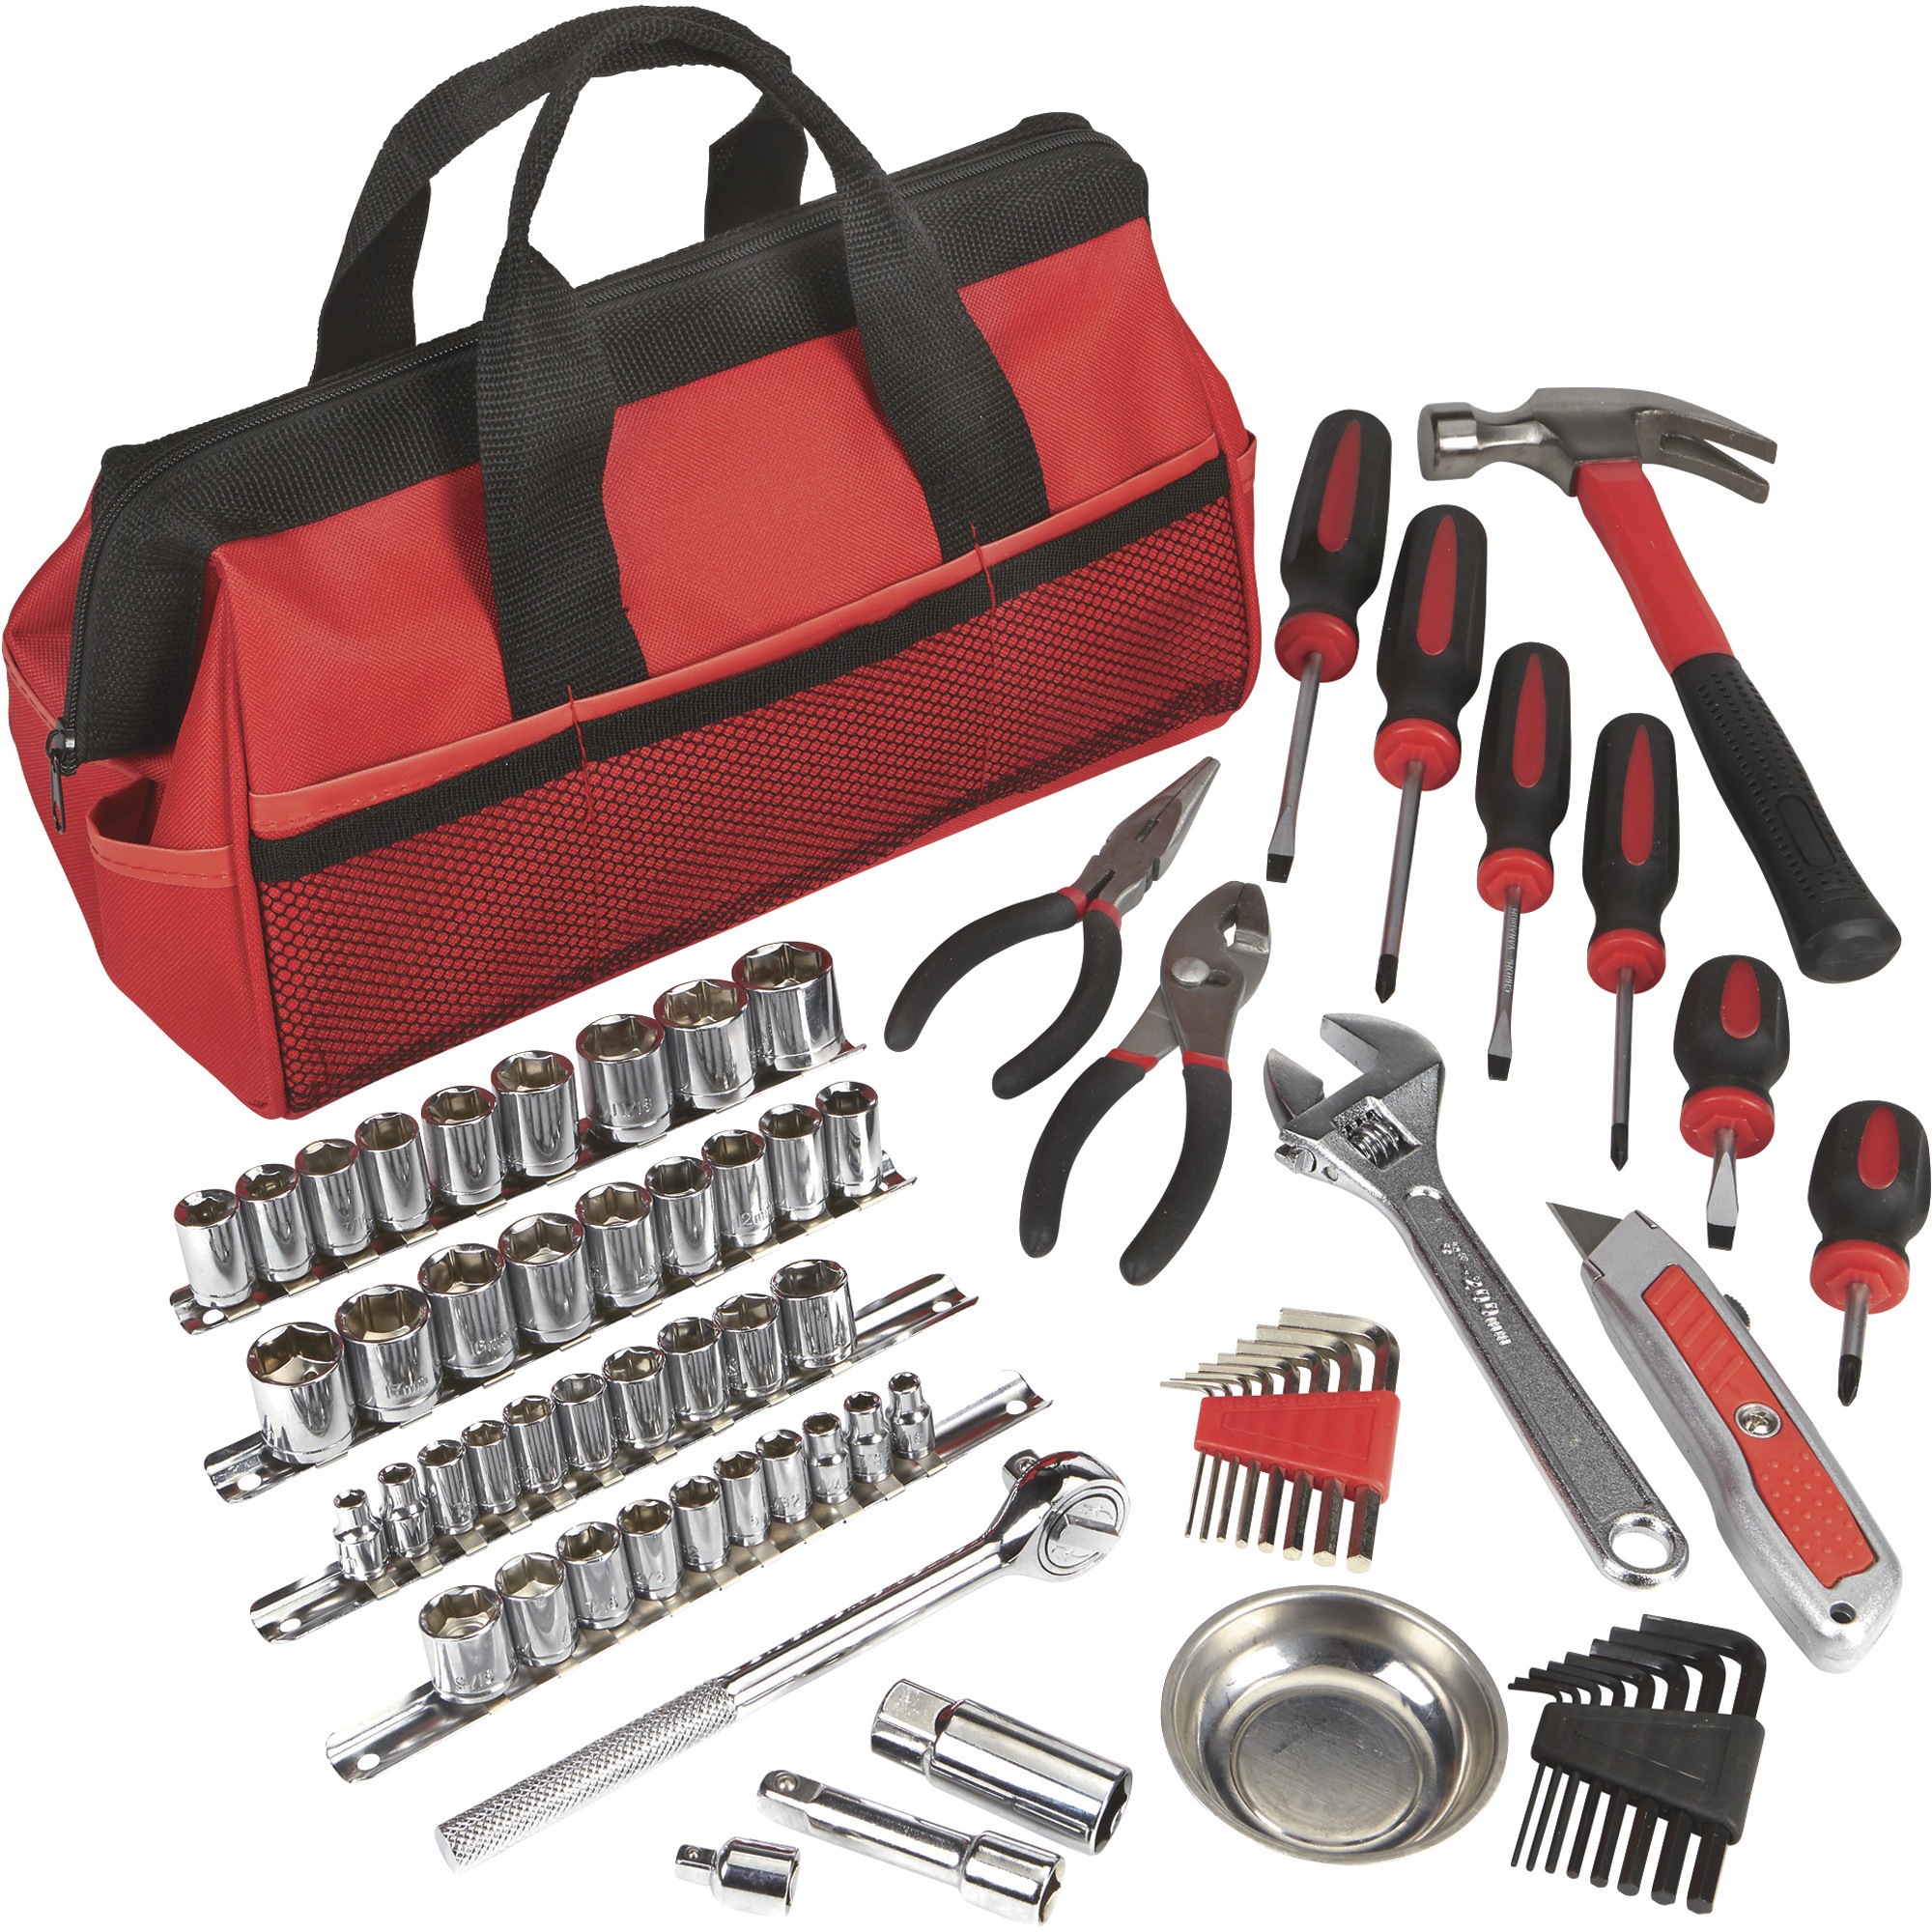 Ironton Tool Bag Set, 70-Piece, 1/4Inch and 3/8Inch Drive